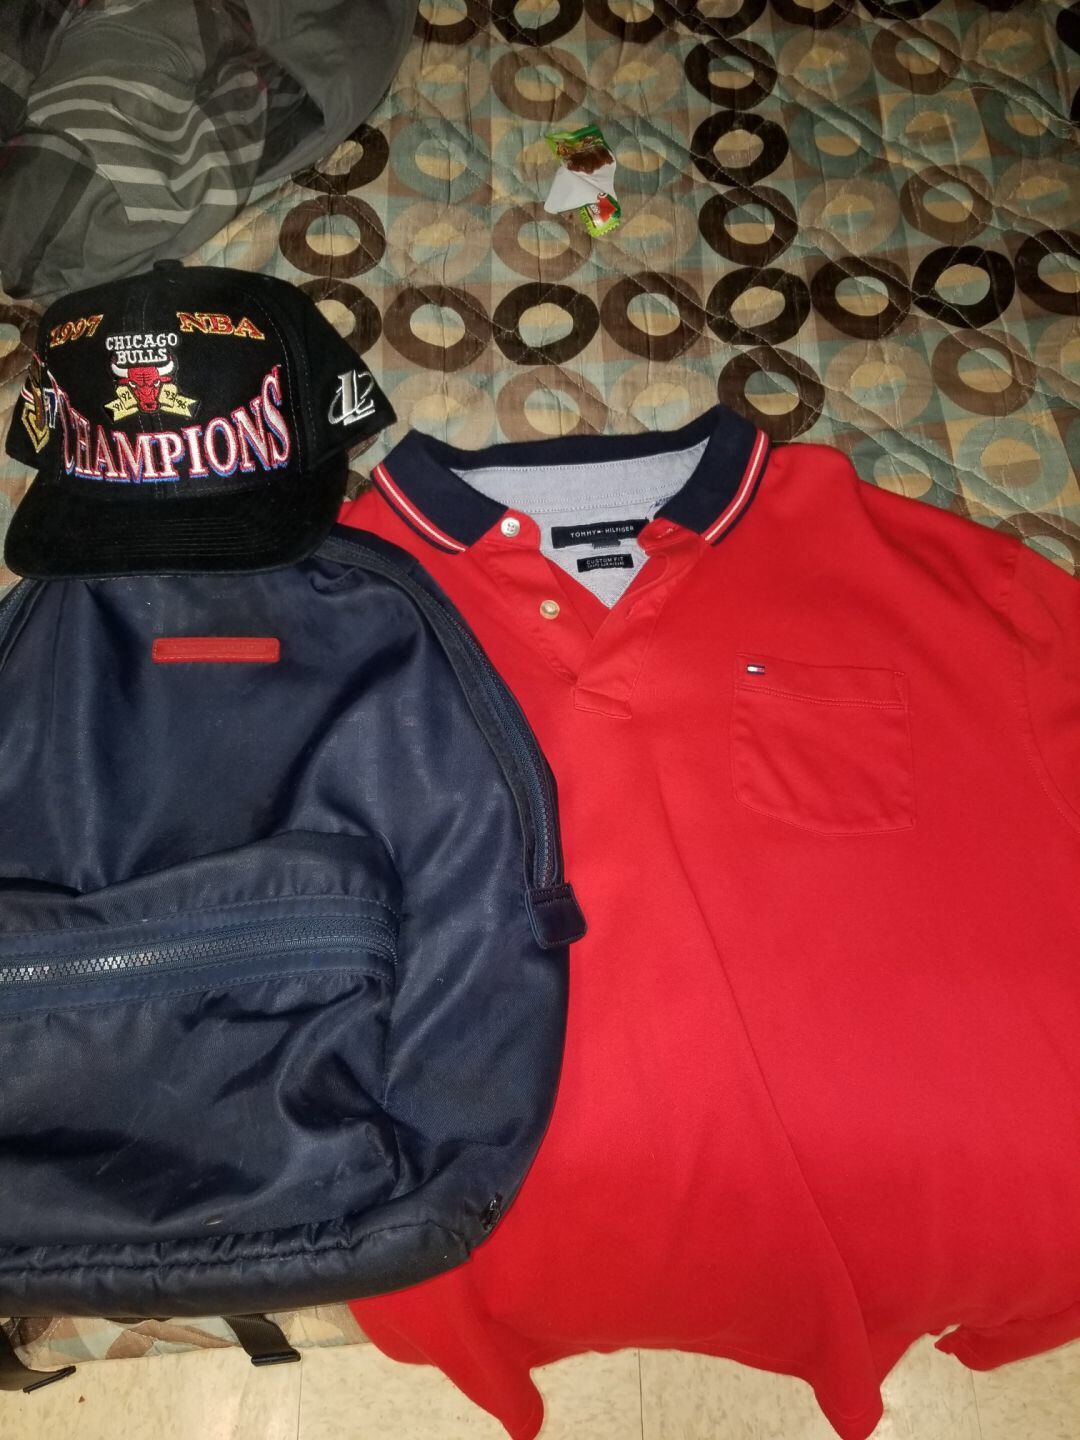 Tommy Hilfiger backpack and shirt